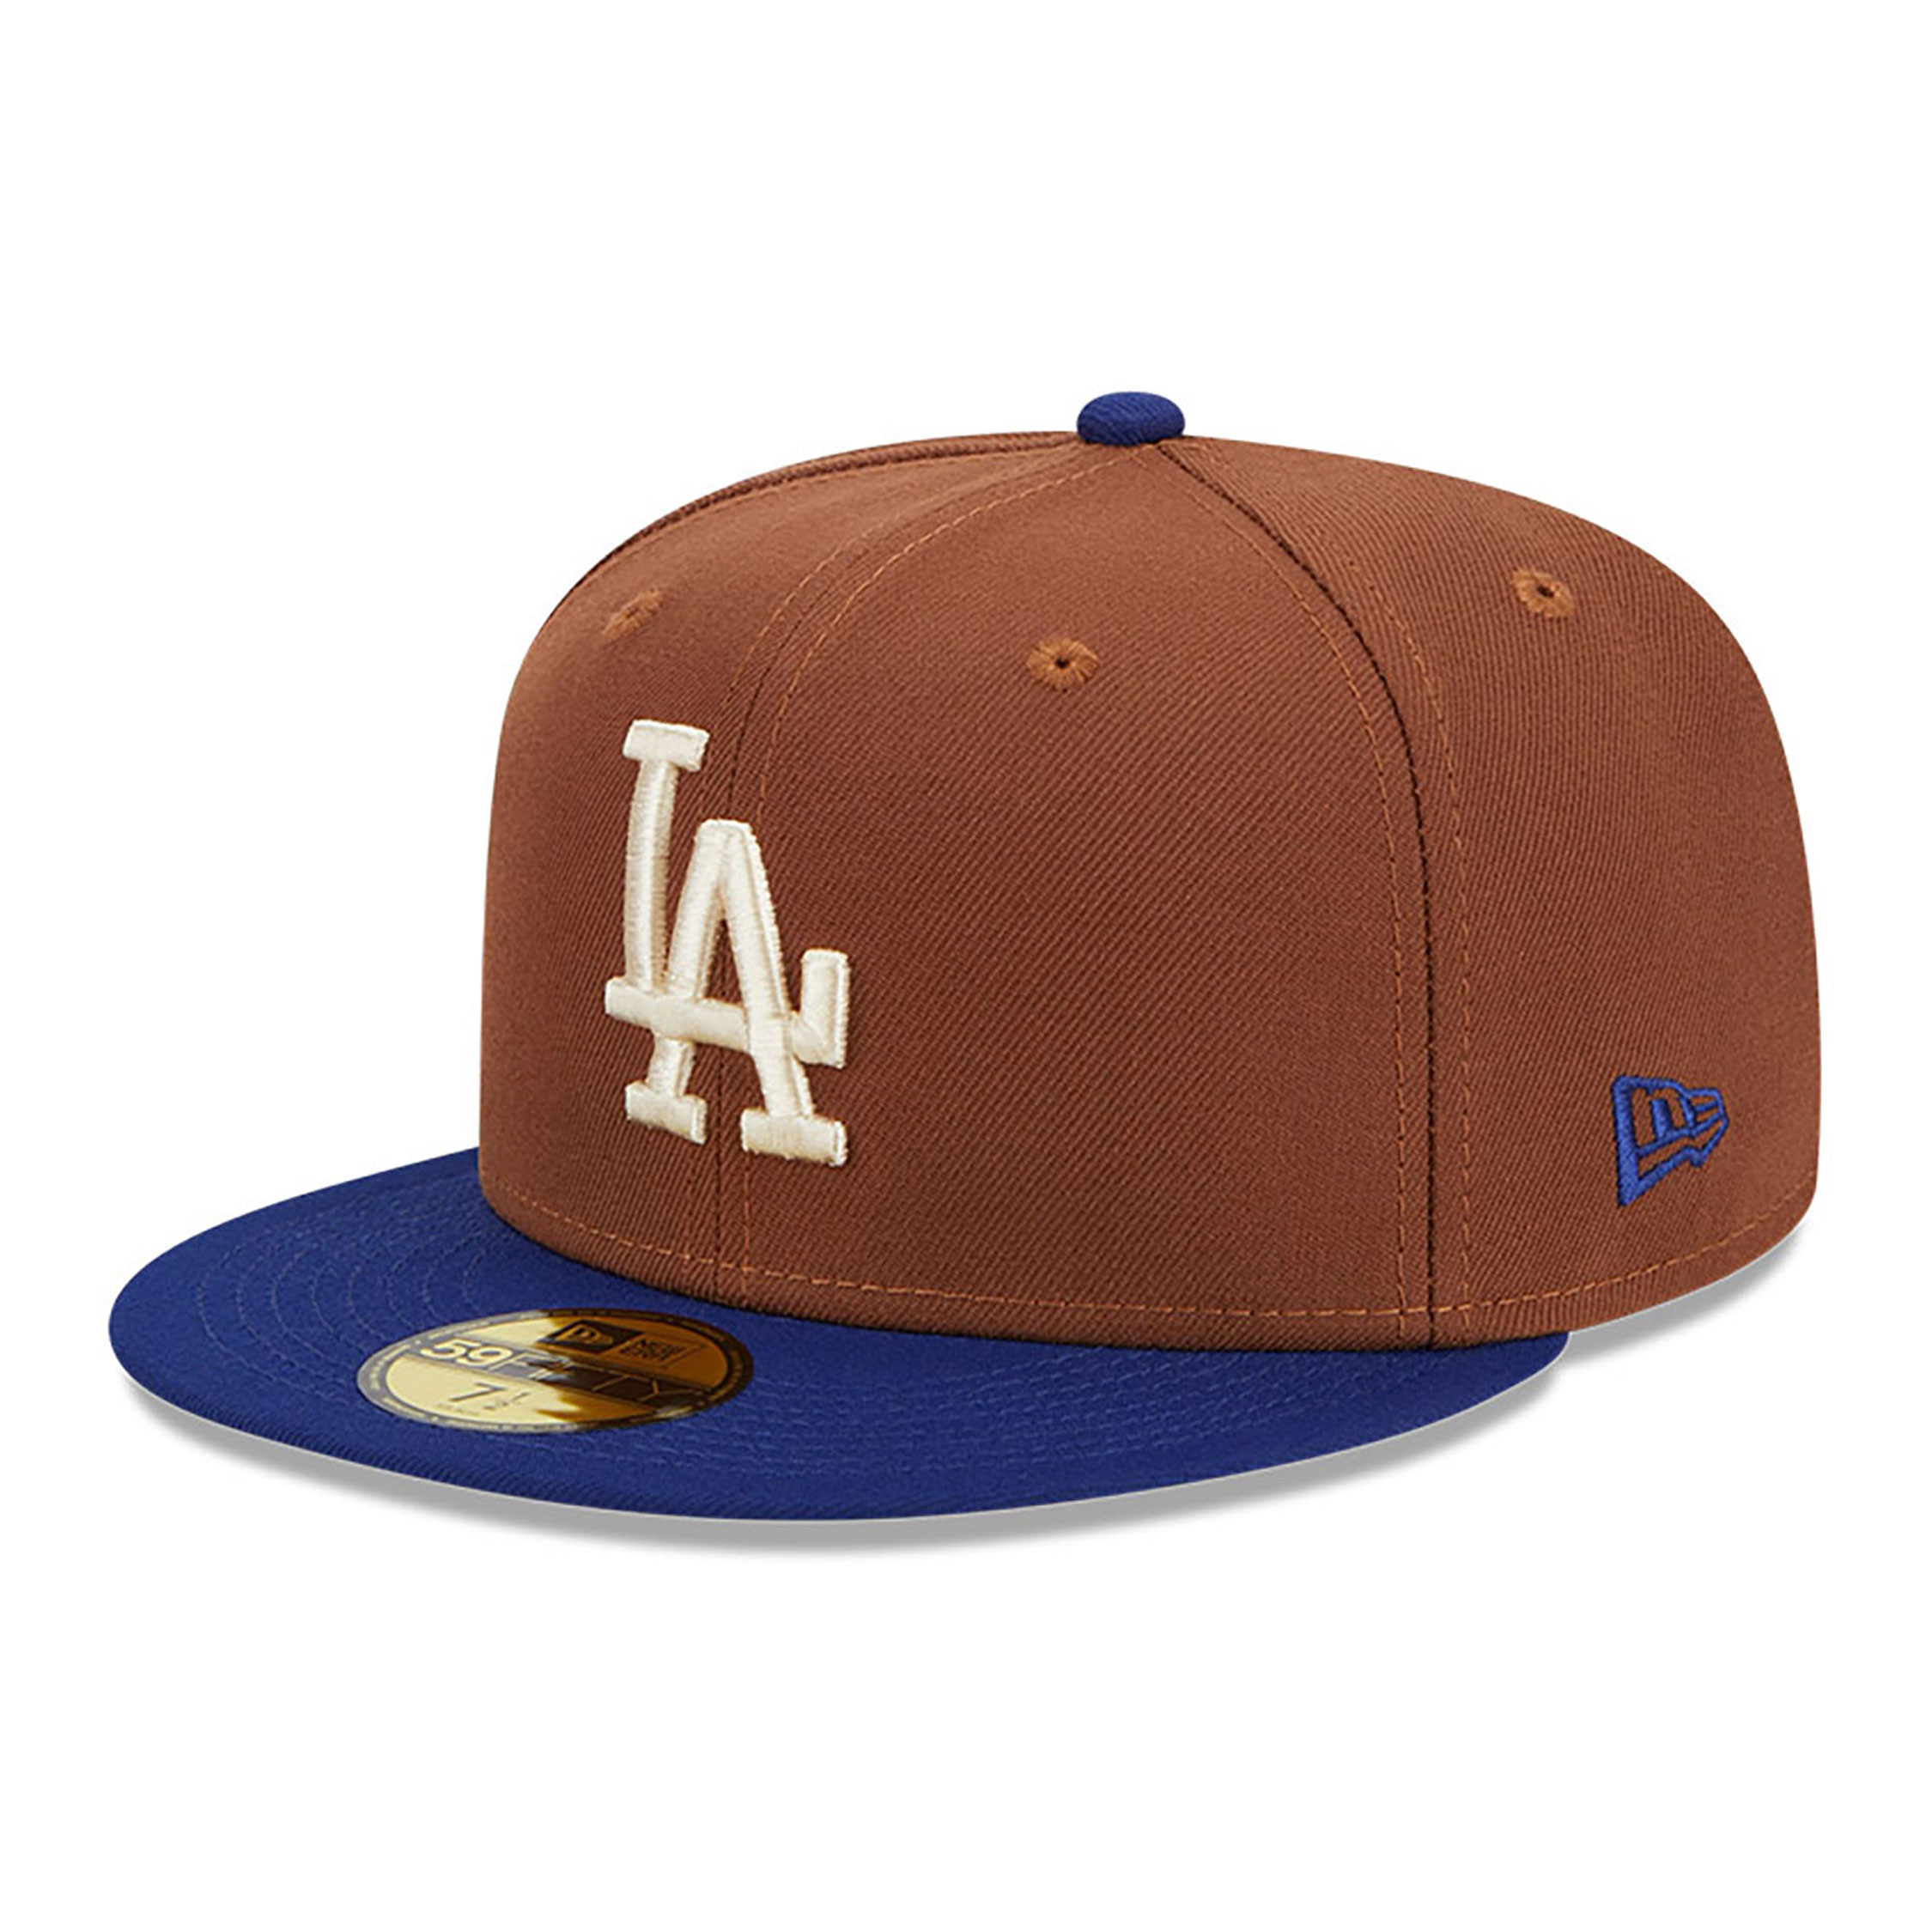 LA Dodgers Harvest Brown 59FIFTY Fitted Cap